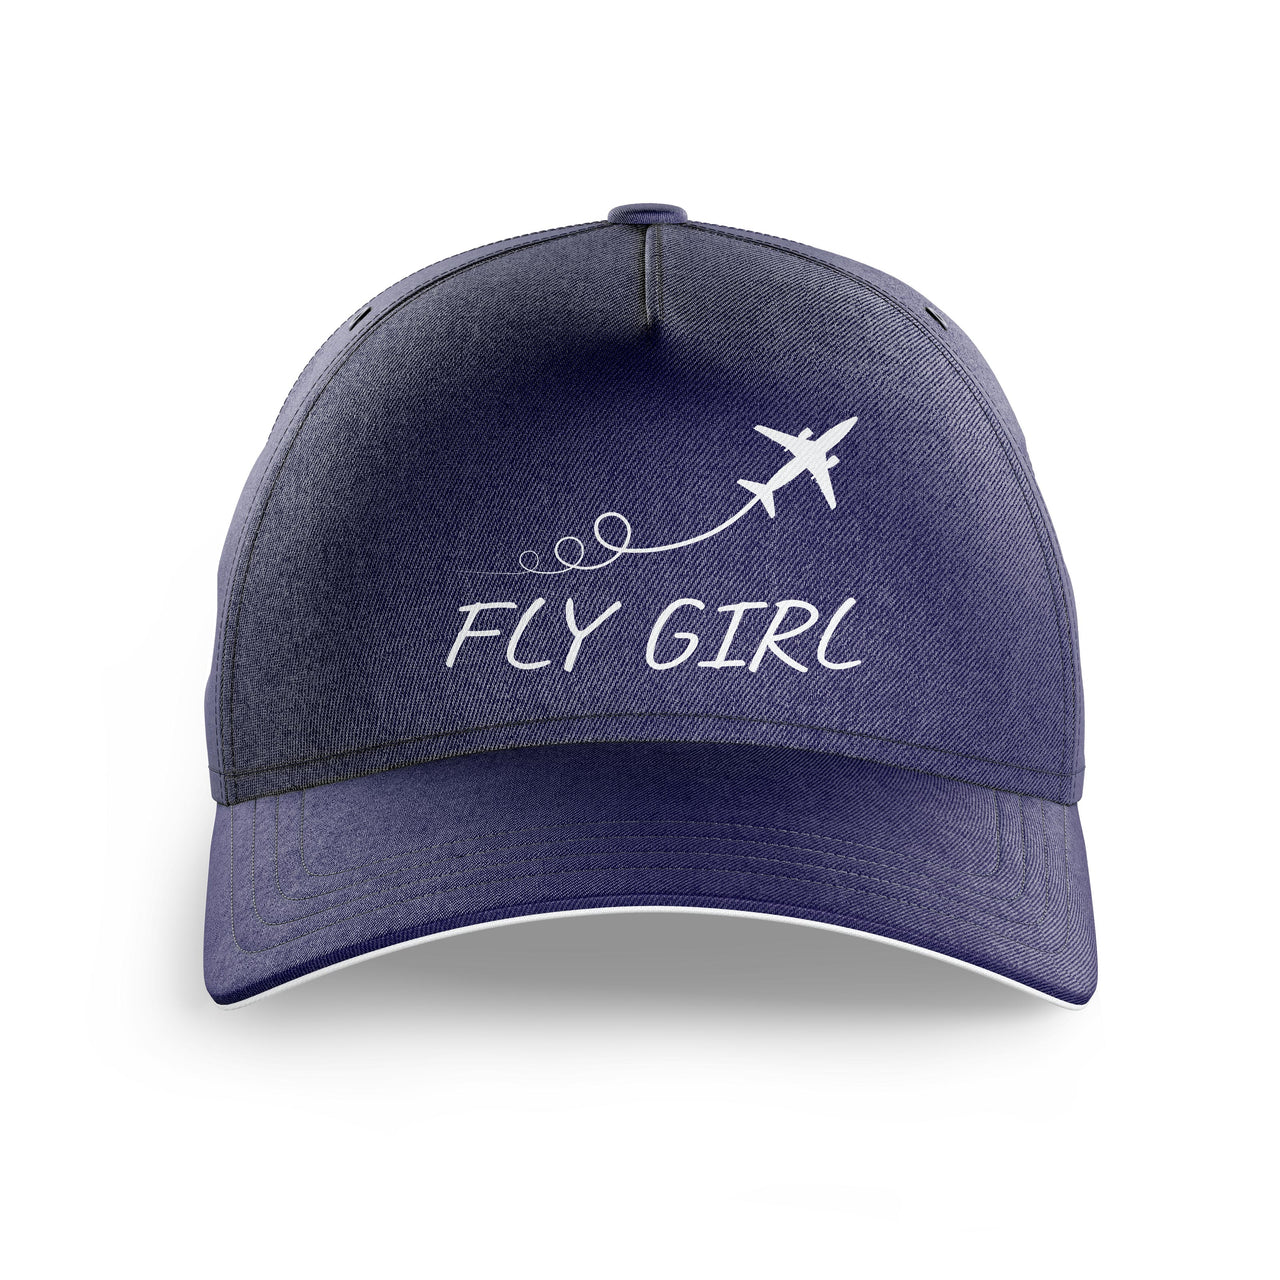 Just Fly It & Fly Girl Printed Hats